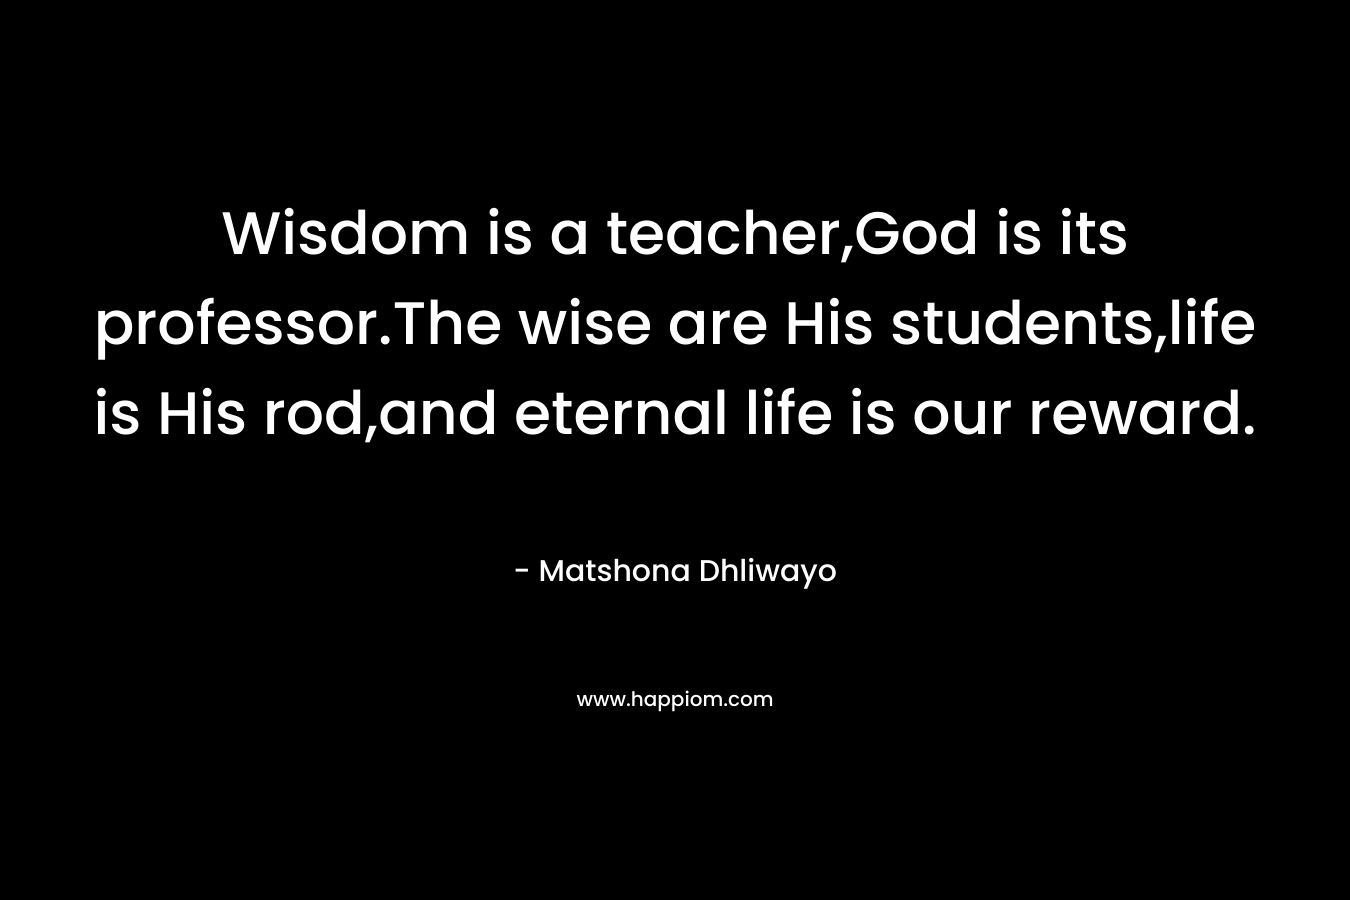 Wisdom is a teacher,God is its professor.The wise are His students,life is His rod,and eternal life is our reward.